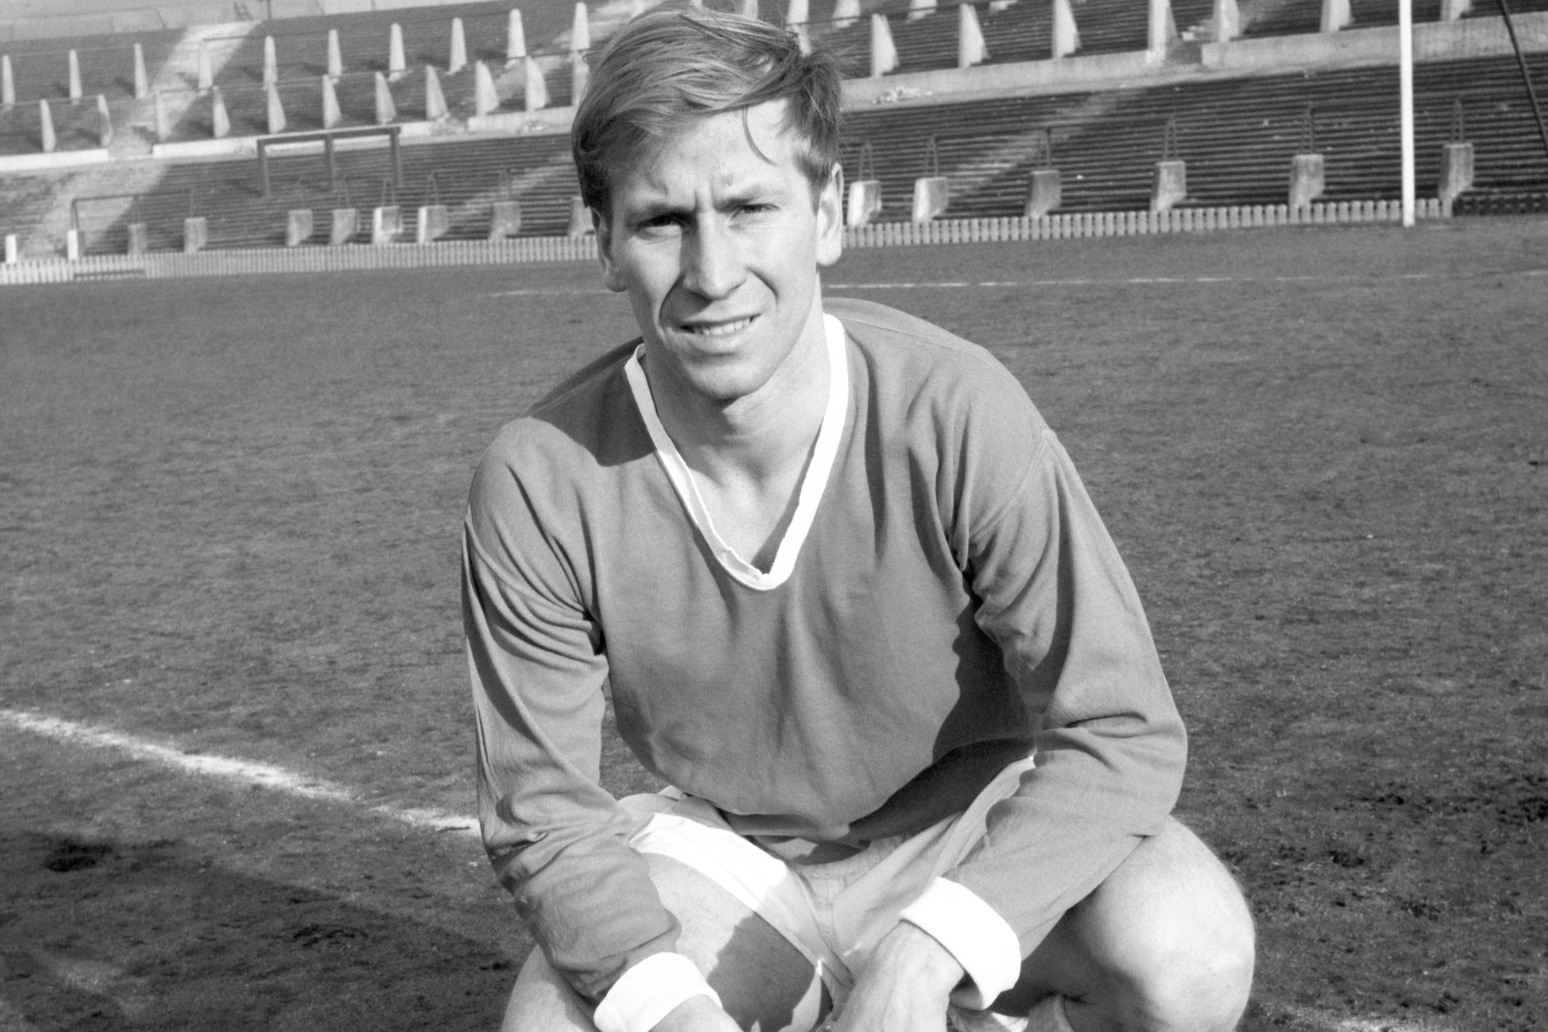 Manchester United and England great Sir Bobby Charlton dies aged 86 